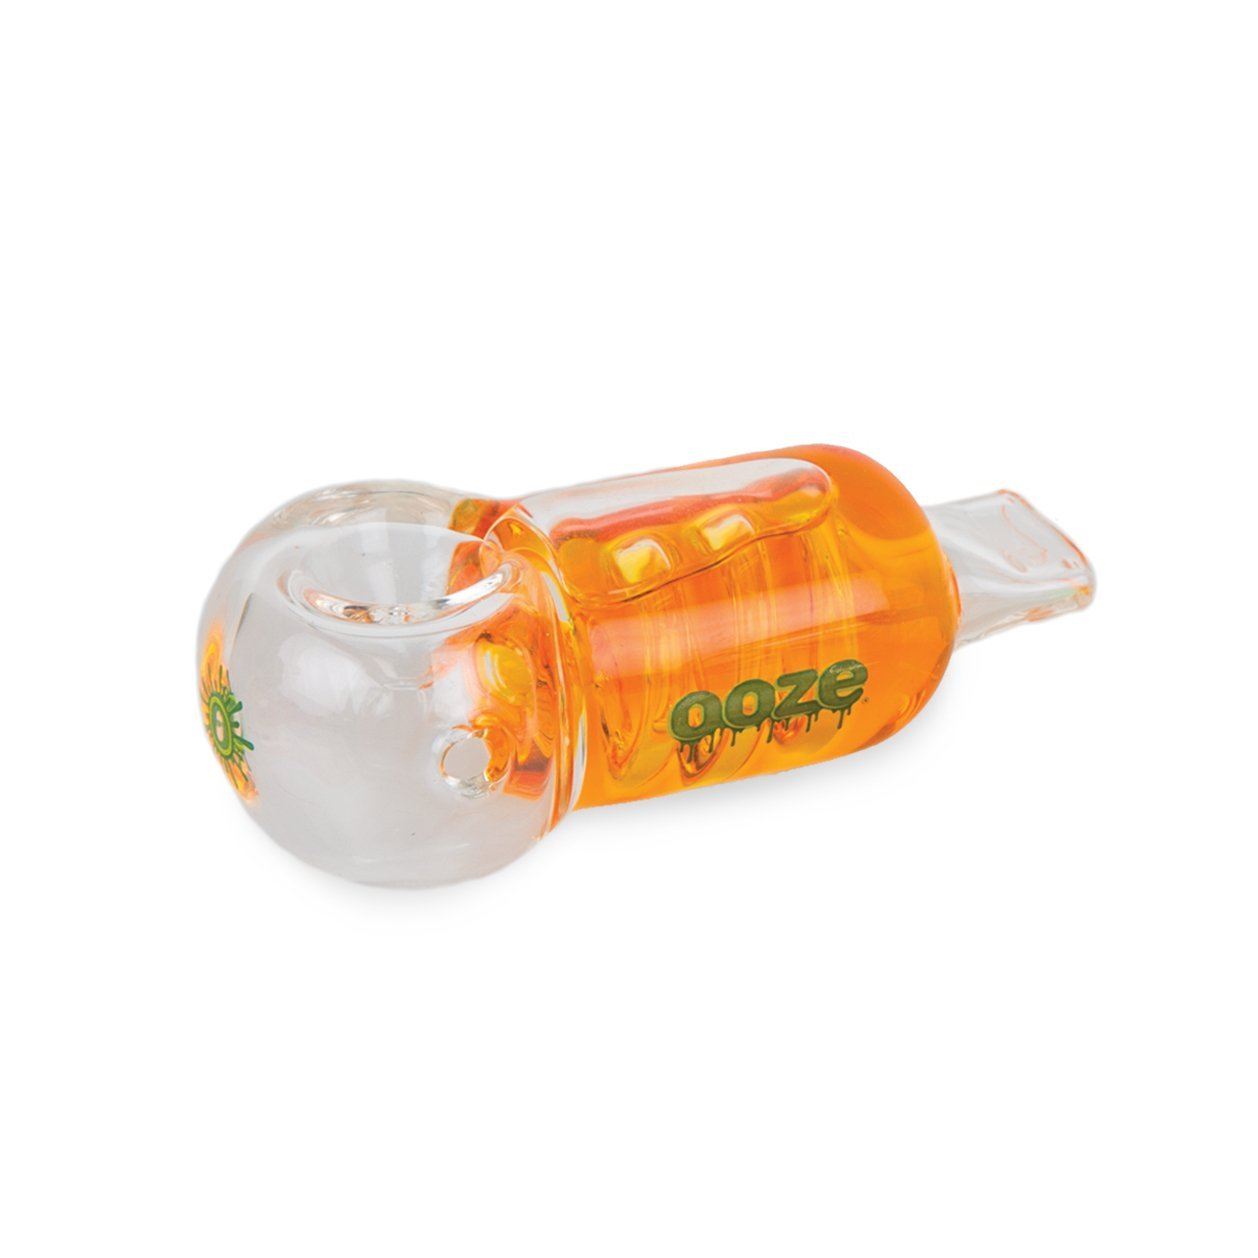 OOZE Cryo Glycerin Glass Bowl - Various Colors (1 Count) Flower Power Packages Orange 